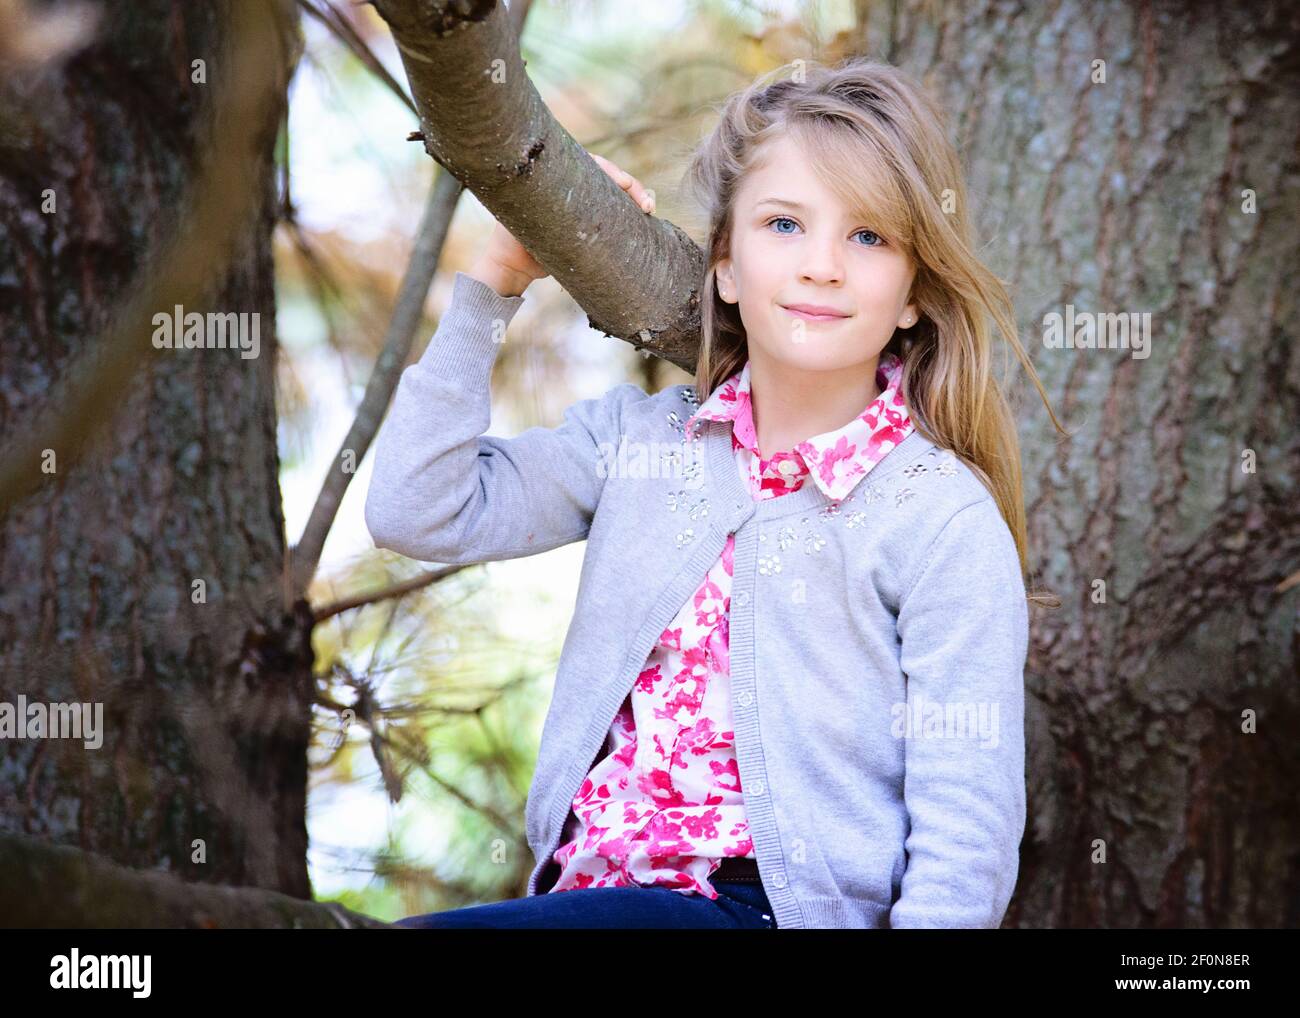 Young Blond Girl Outside Sitting In A Tree Stock Photo Alamy